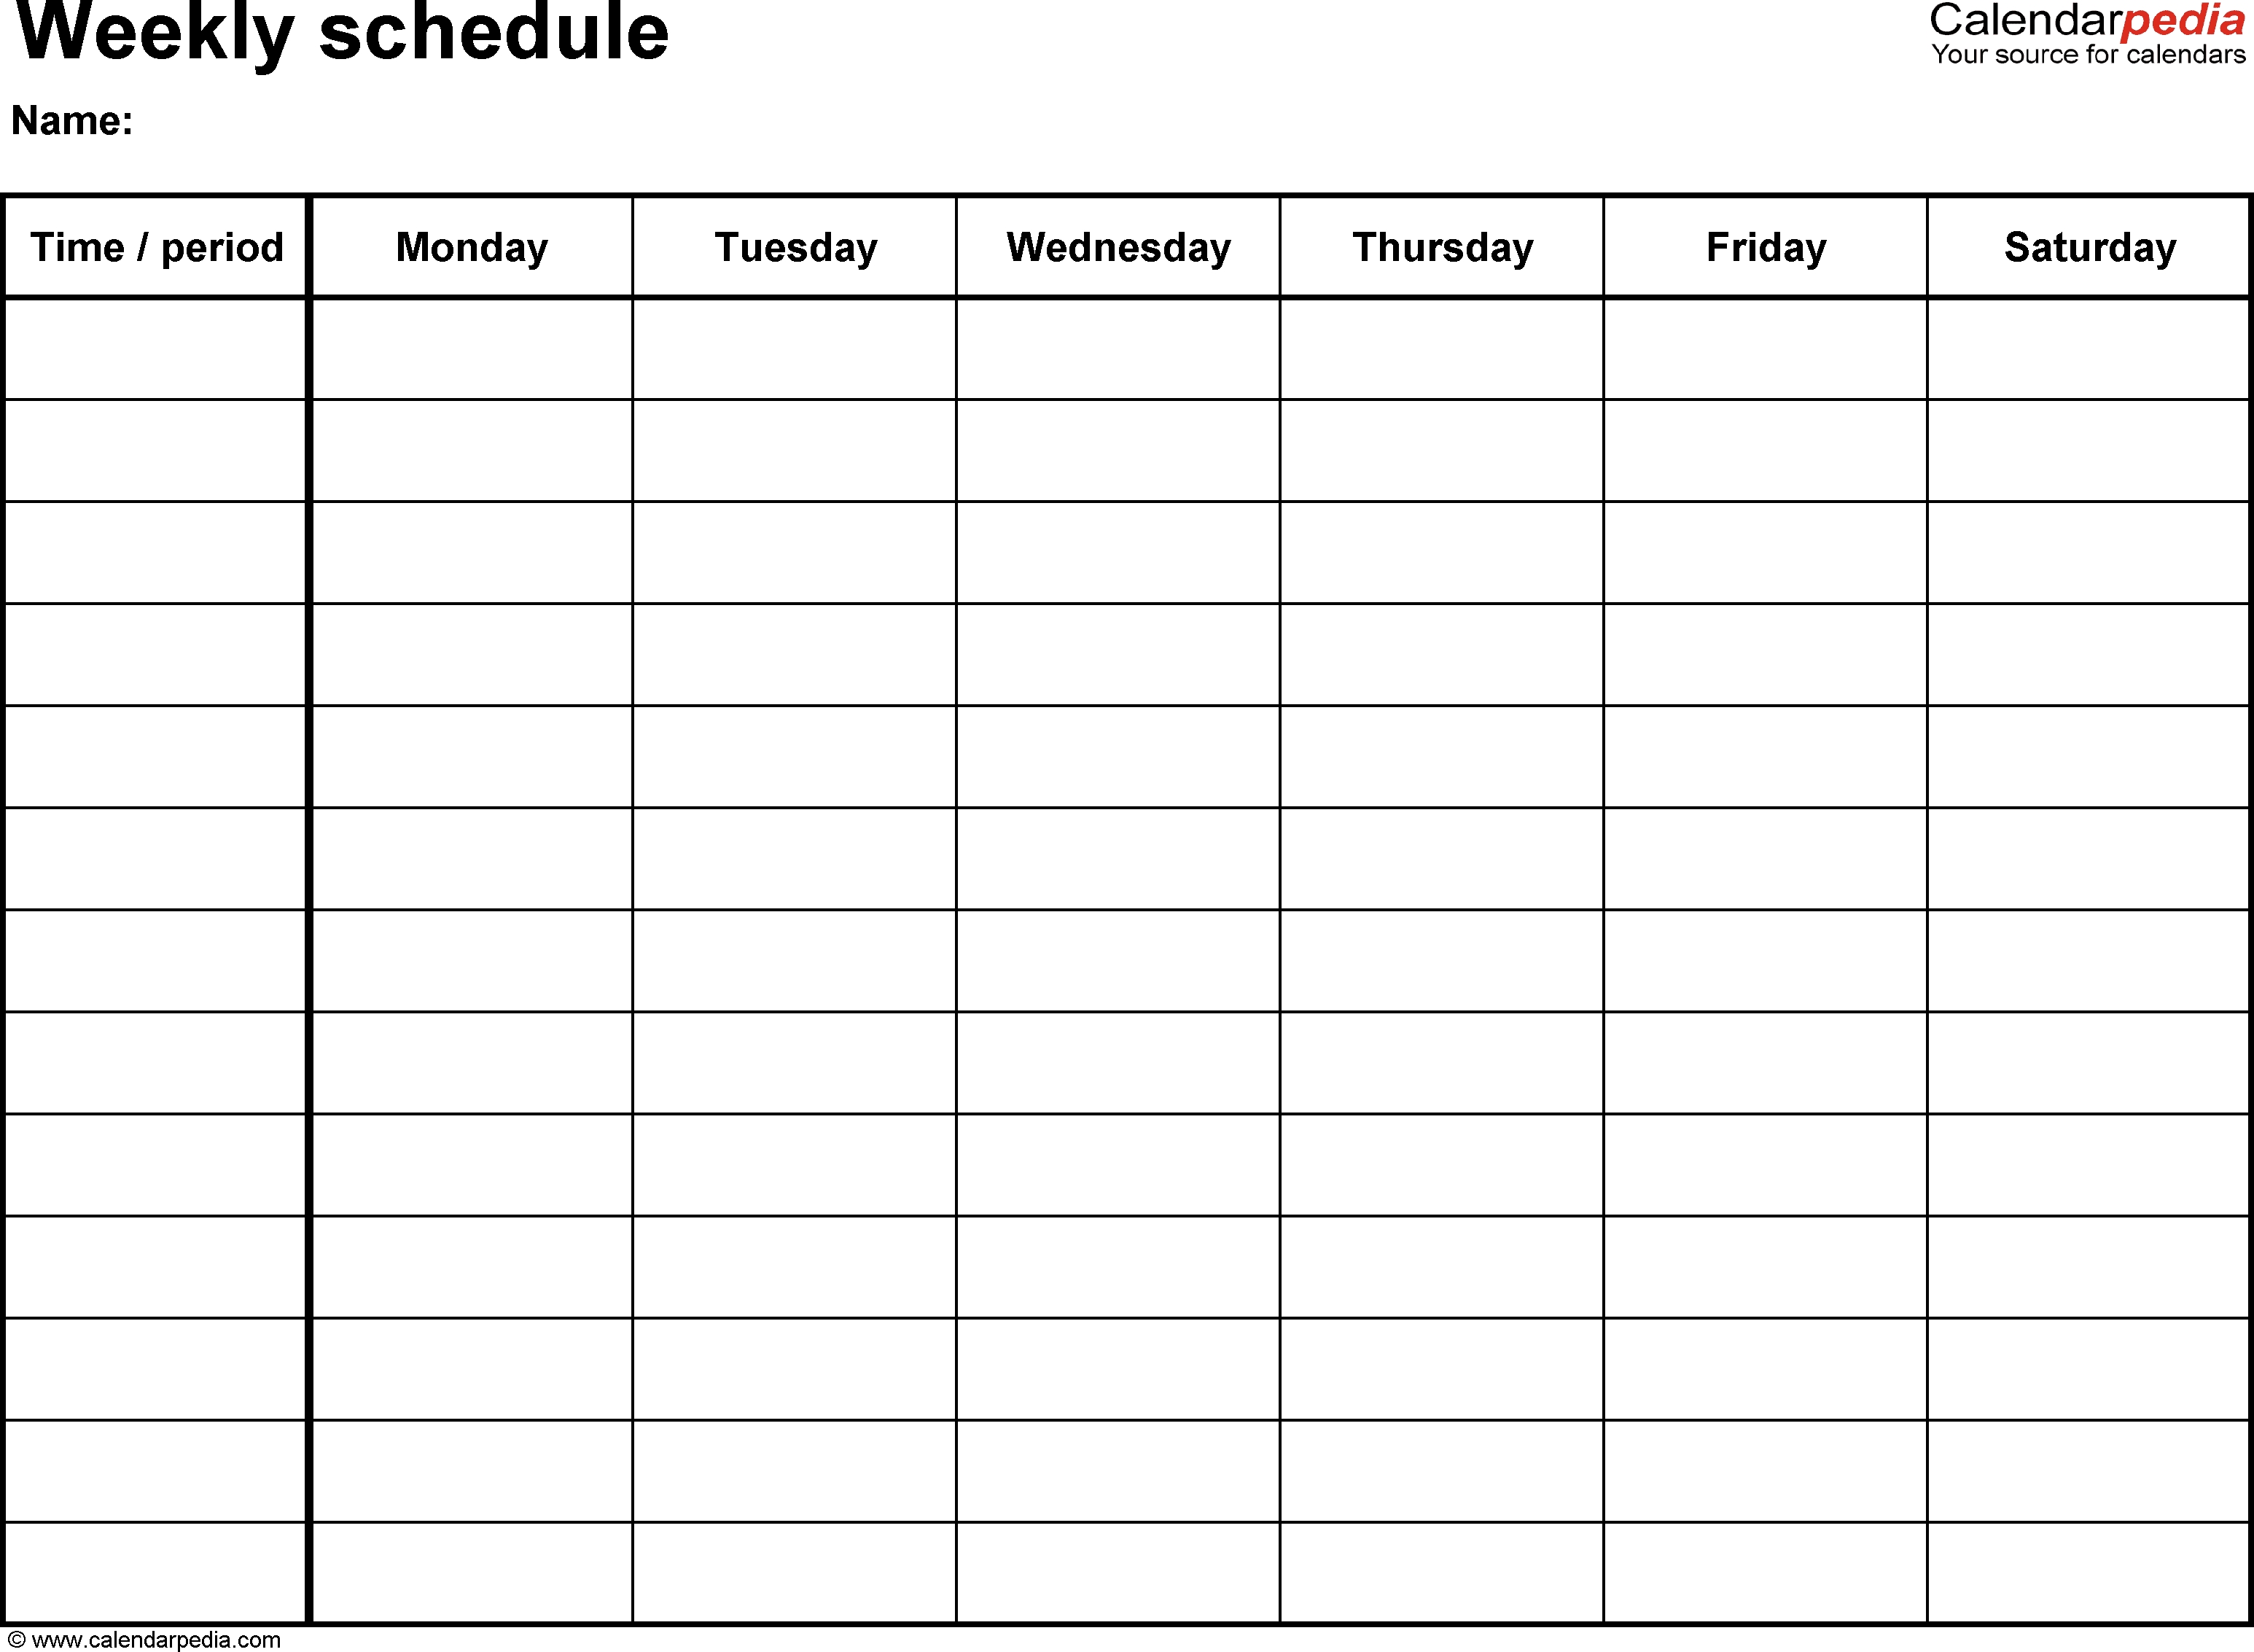 Free Weekly Schedule Templates For Excel - 18 Templates for Printable Schedule 1 Week Editable